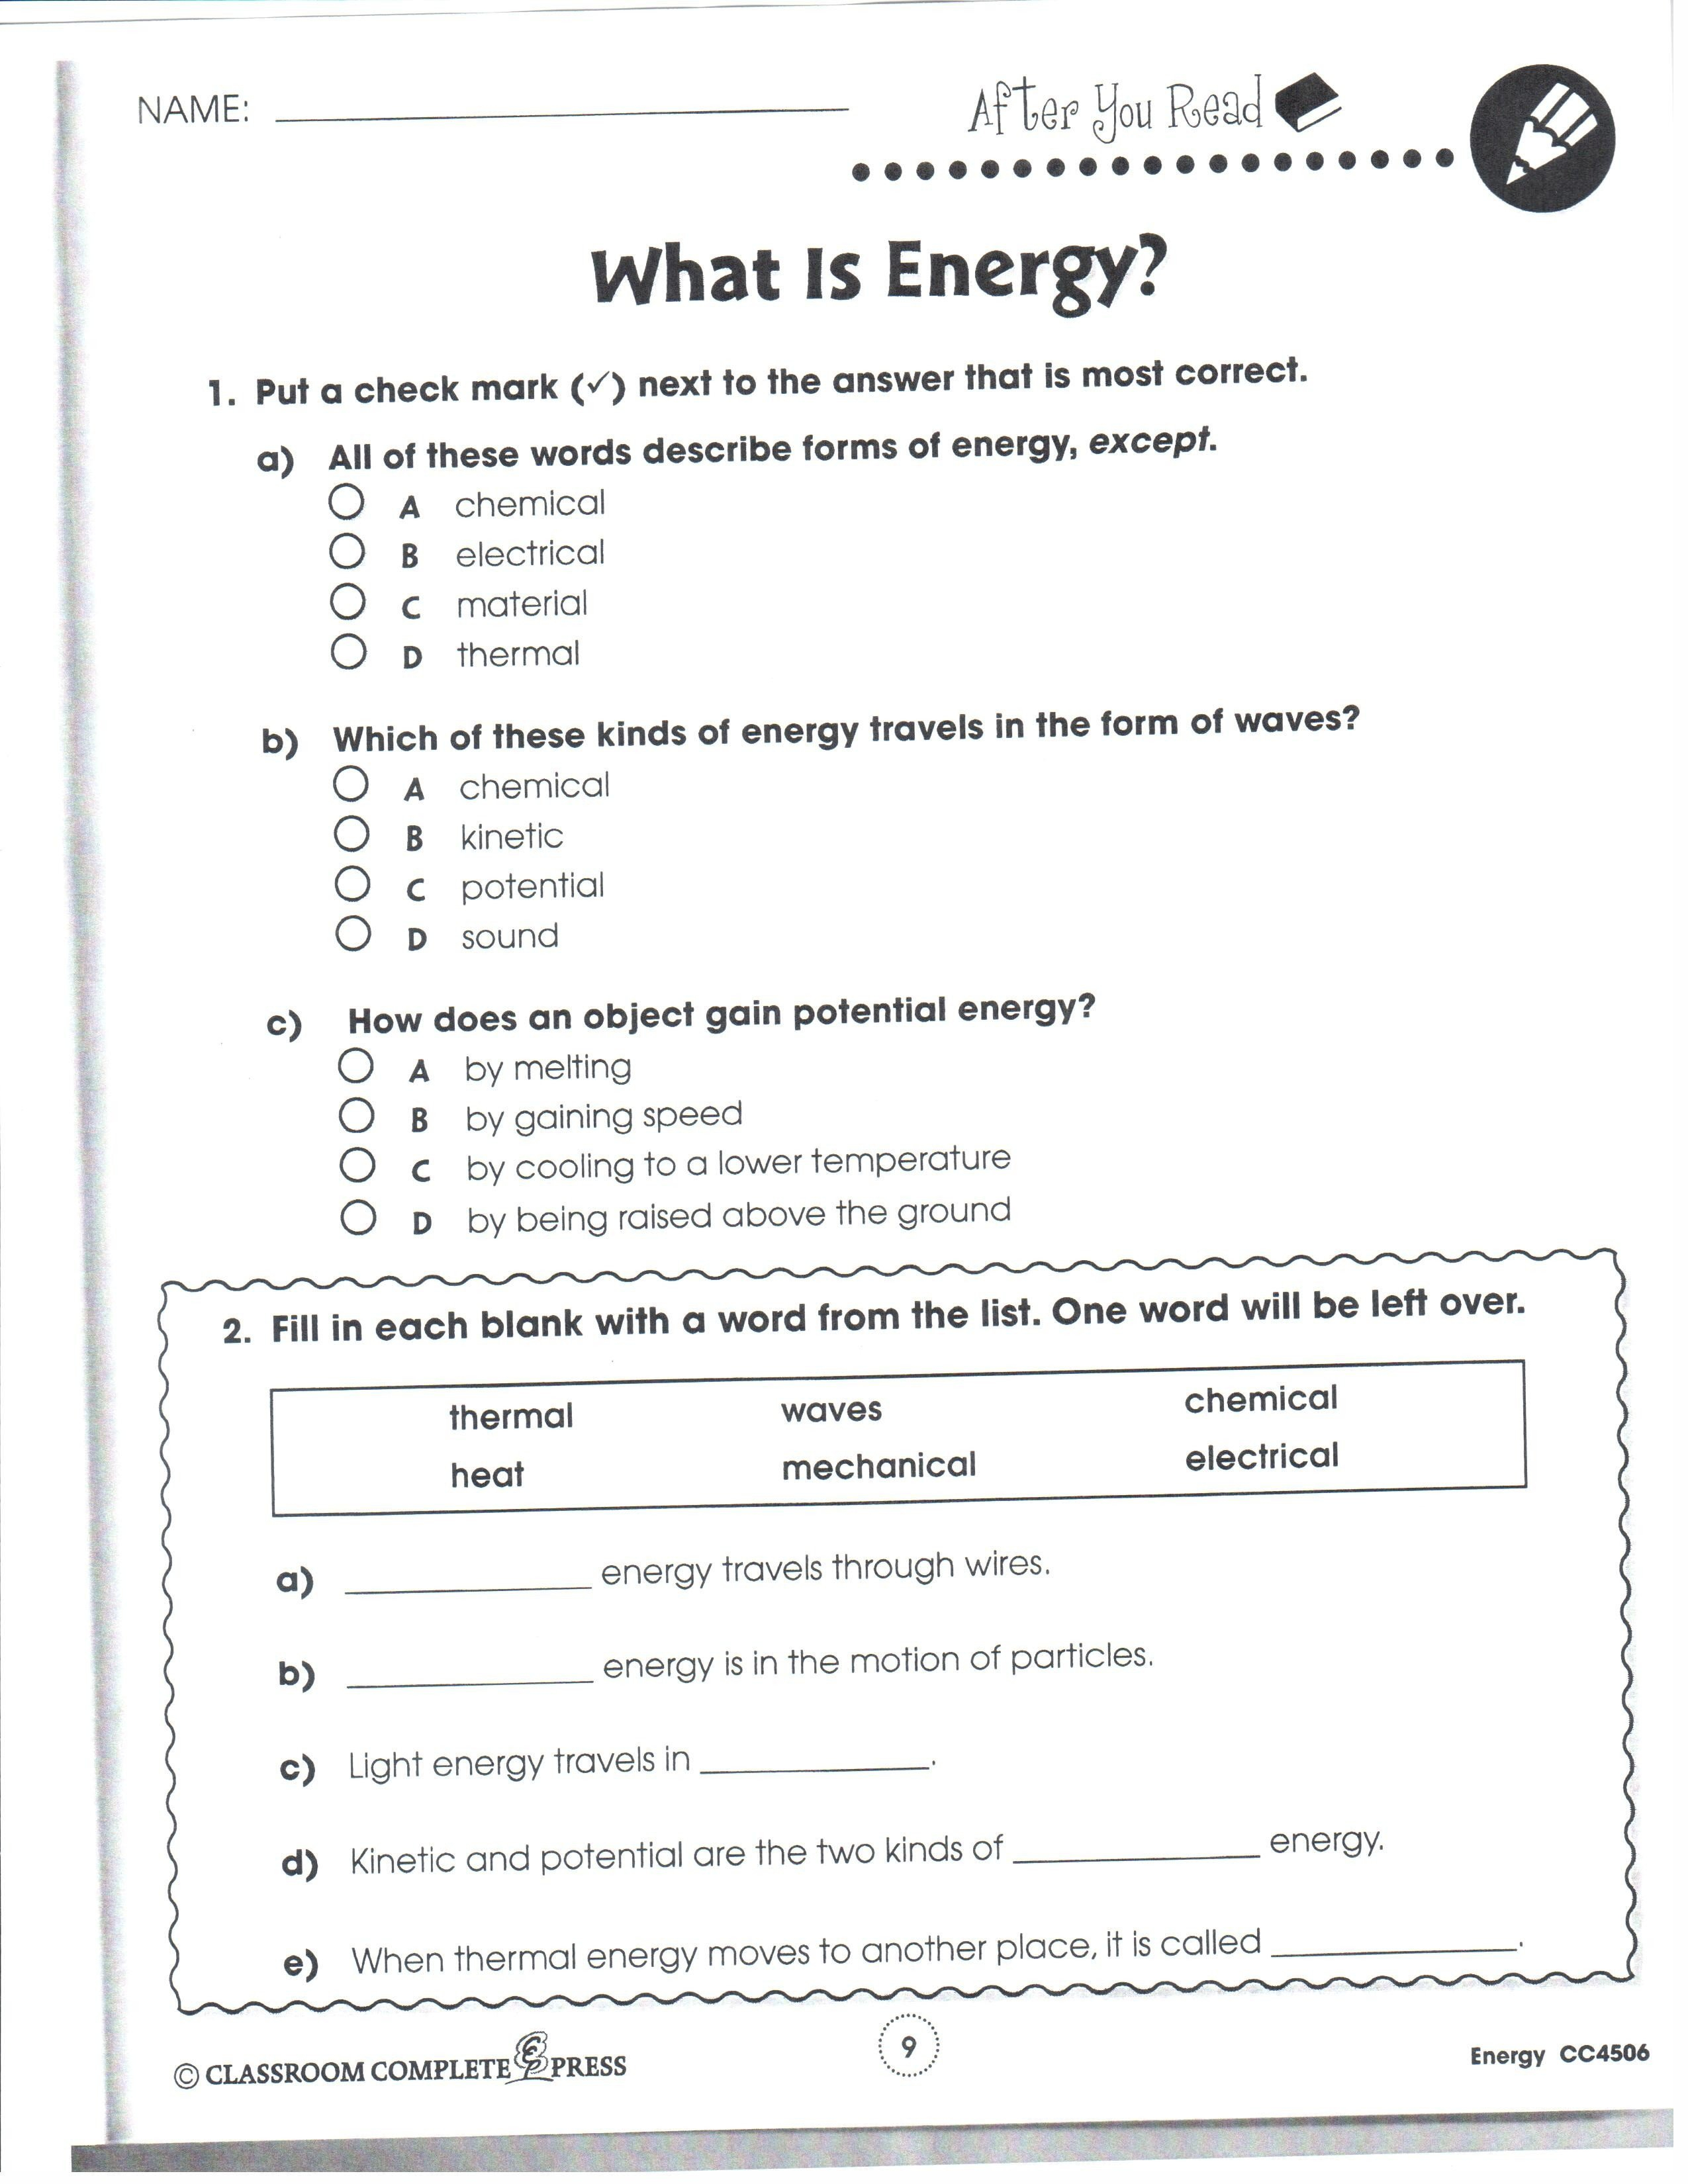 Carson Dellosa Worksheet 75 Images In Collection Page 1 Along With Carson Dellosa Science Worksheets